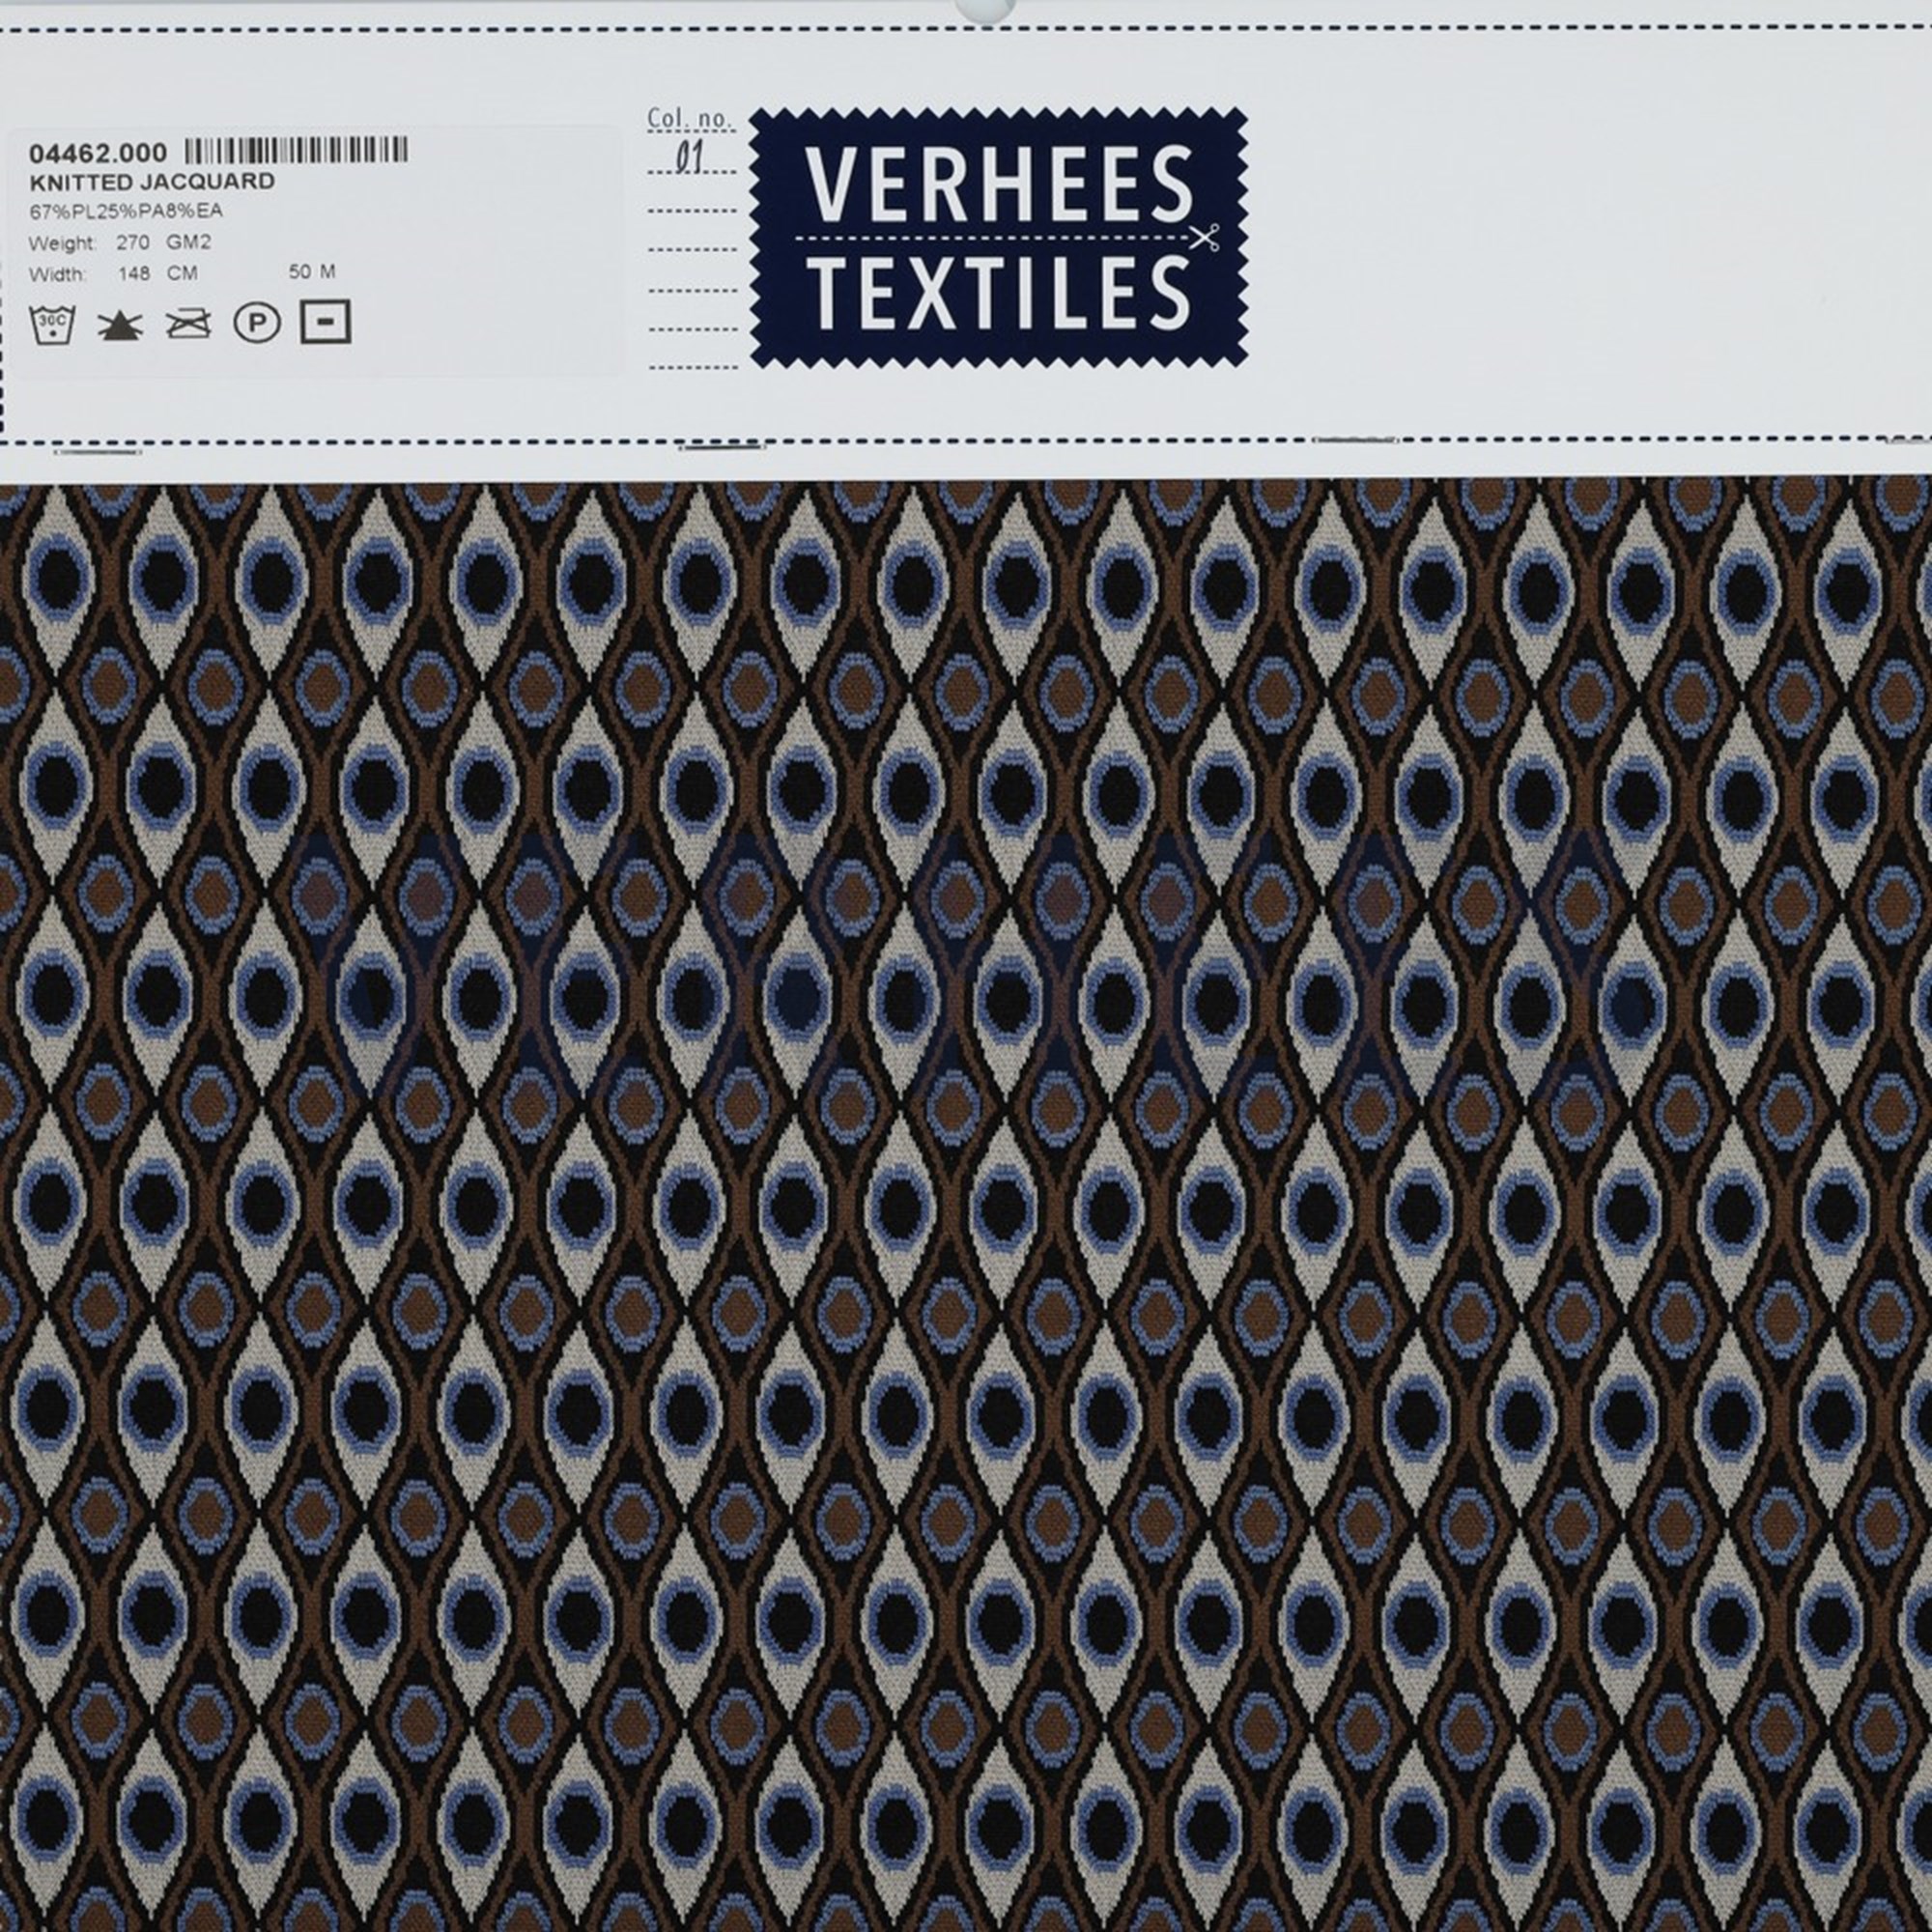 KNITTED JACQUARD MULTI BROWN BLUE (high resolution) #4